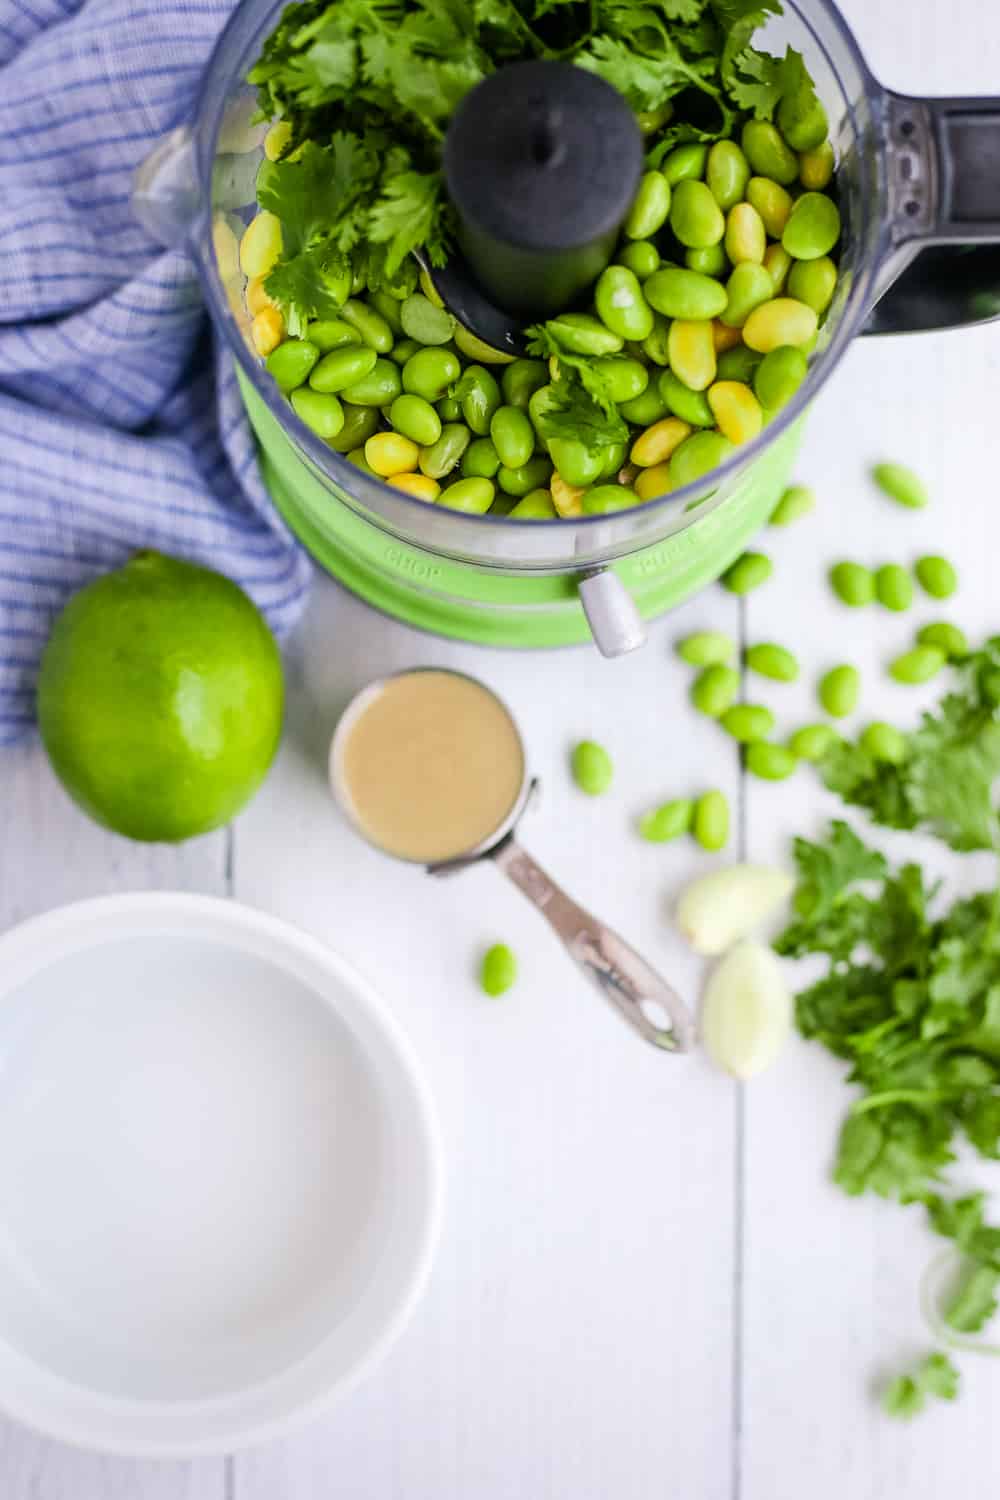 A food processor with shelled edamame and other ingredients to make homemade hummus